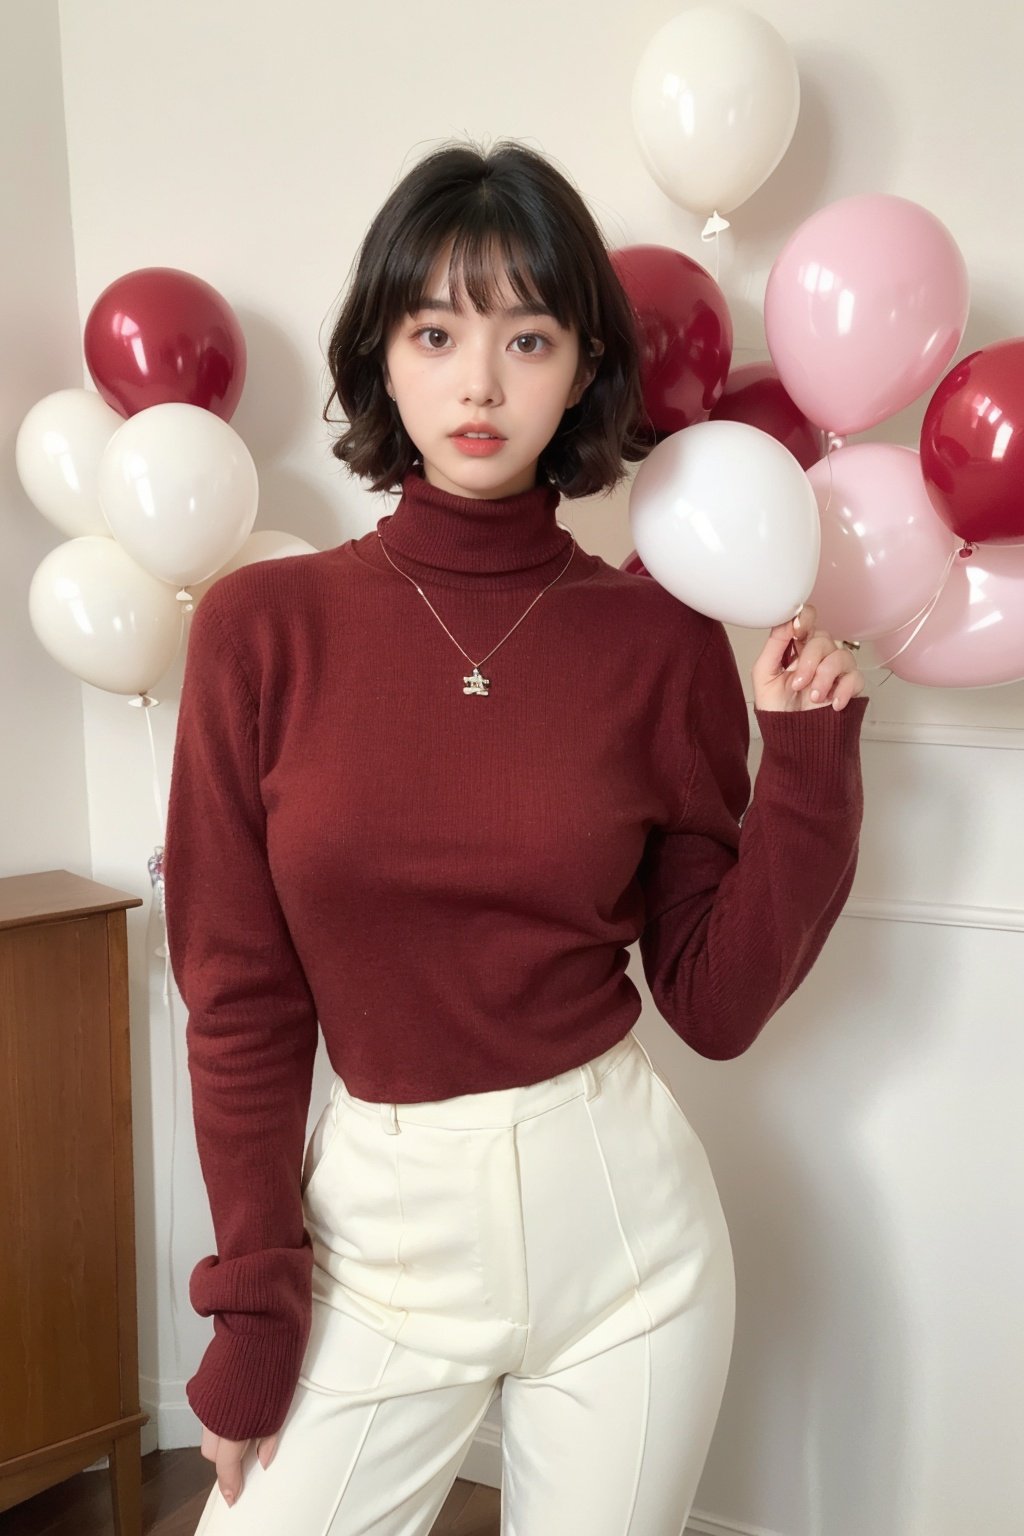 (masterpiece, best quality),fashion portrait photo of beautiful young woman from the 60s wearing a red turtleneck standing in the middle of a ton of white balloons, taken on a hasselblad medium format camera